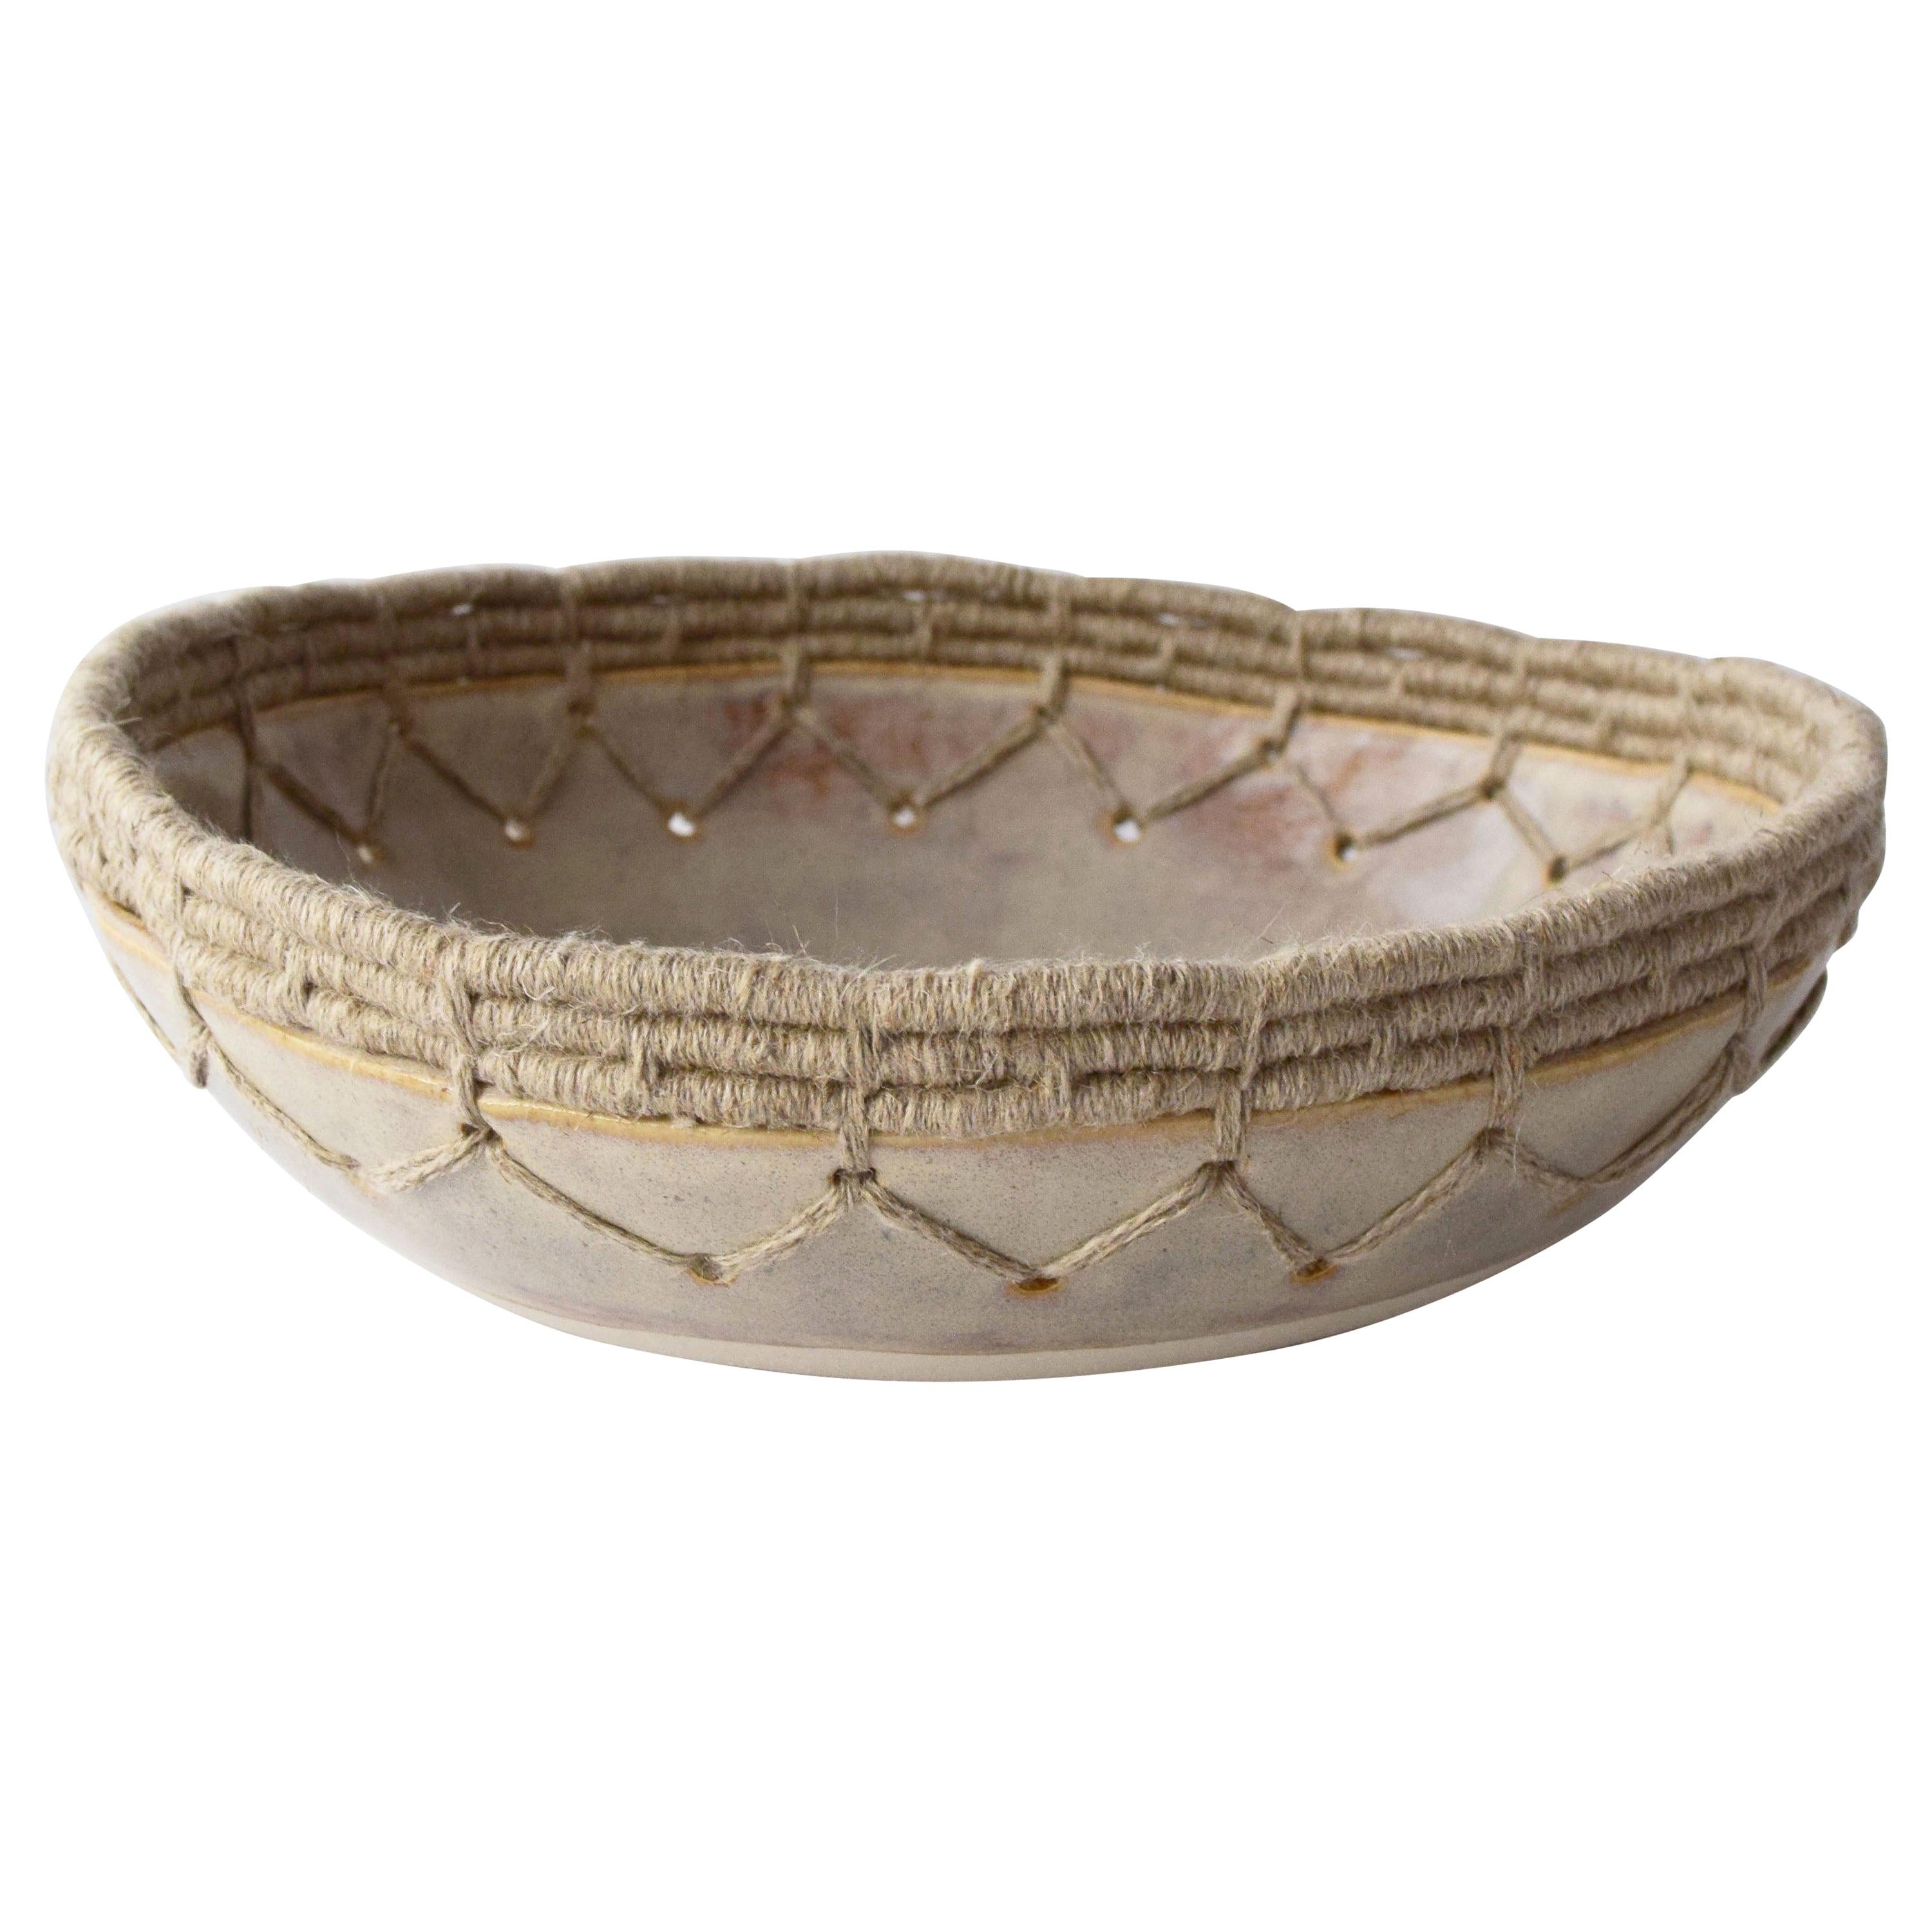 Decorative Bowl #642 in Gray with Woven Natural Linen Edge Detail